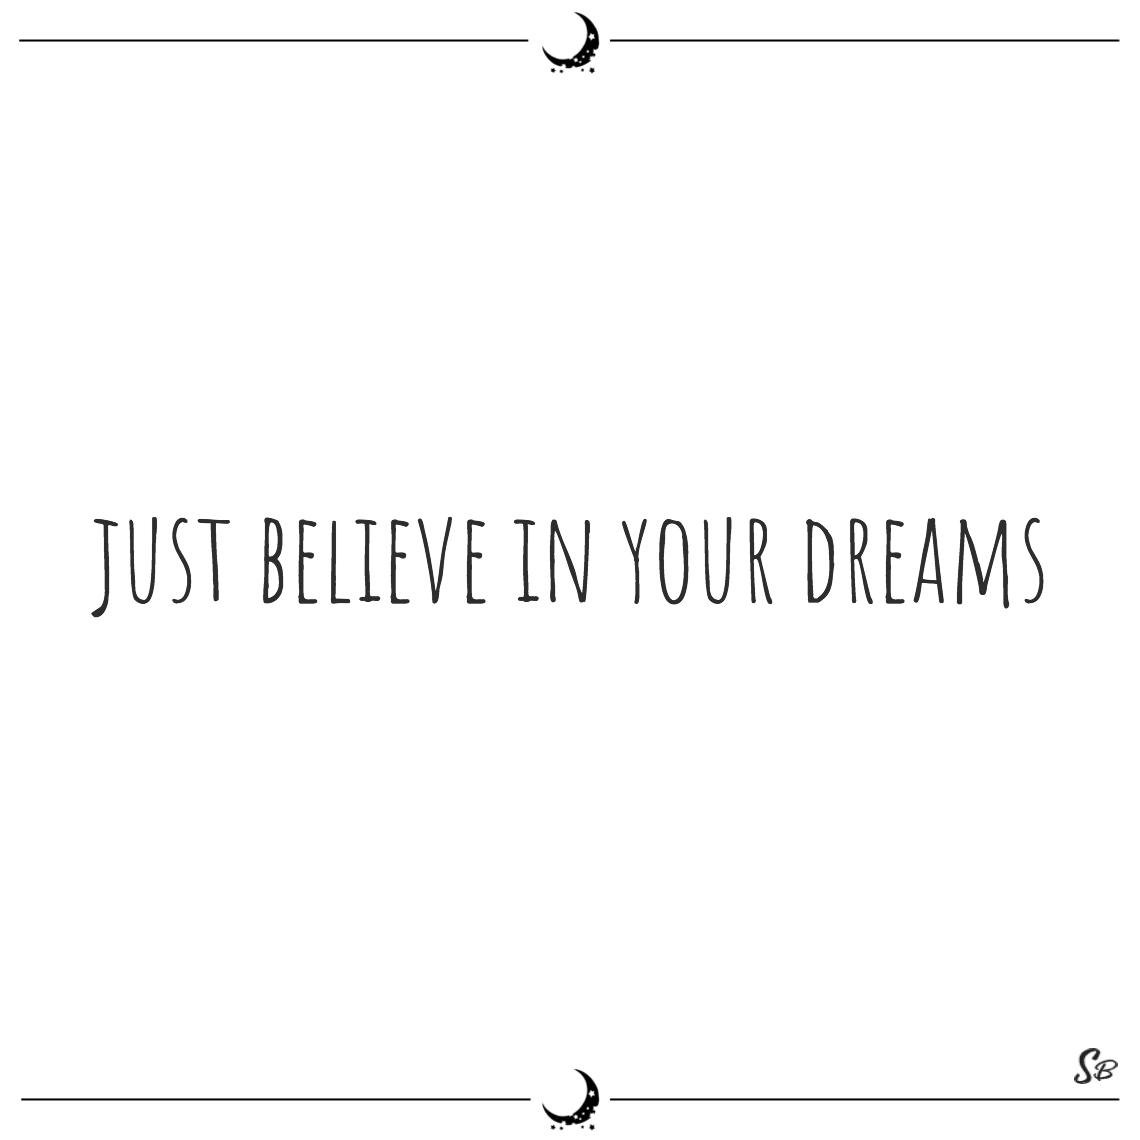 Just believe in your dreams